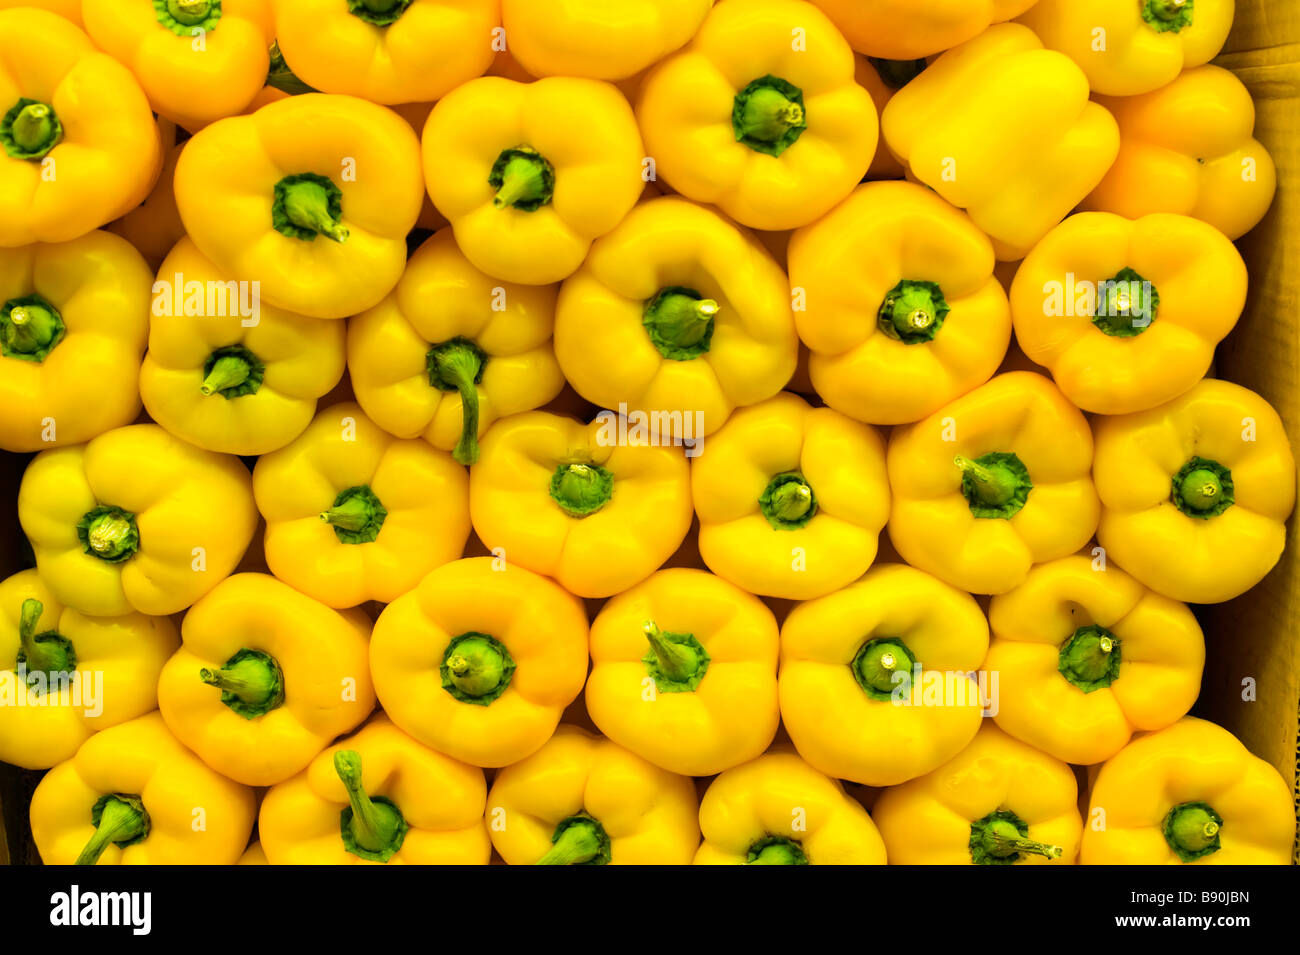 Bright yellow peppers lined up symmetrically Stock Photo